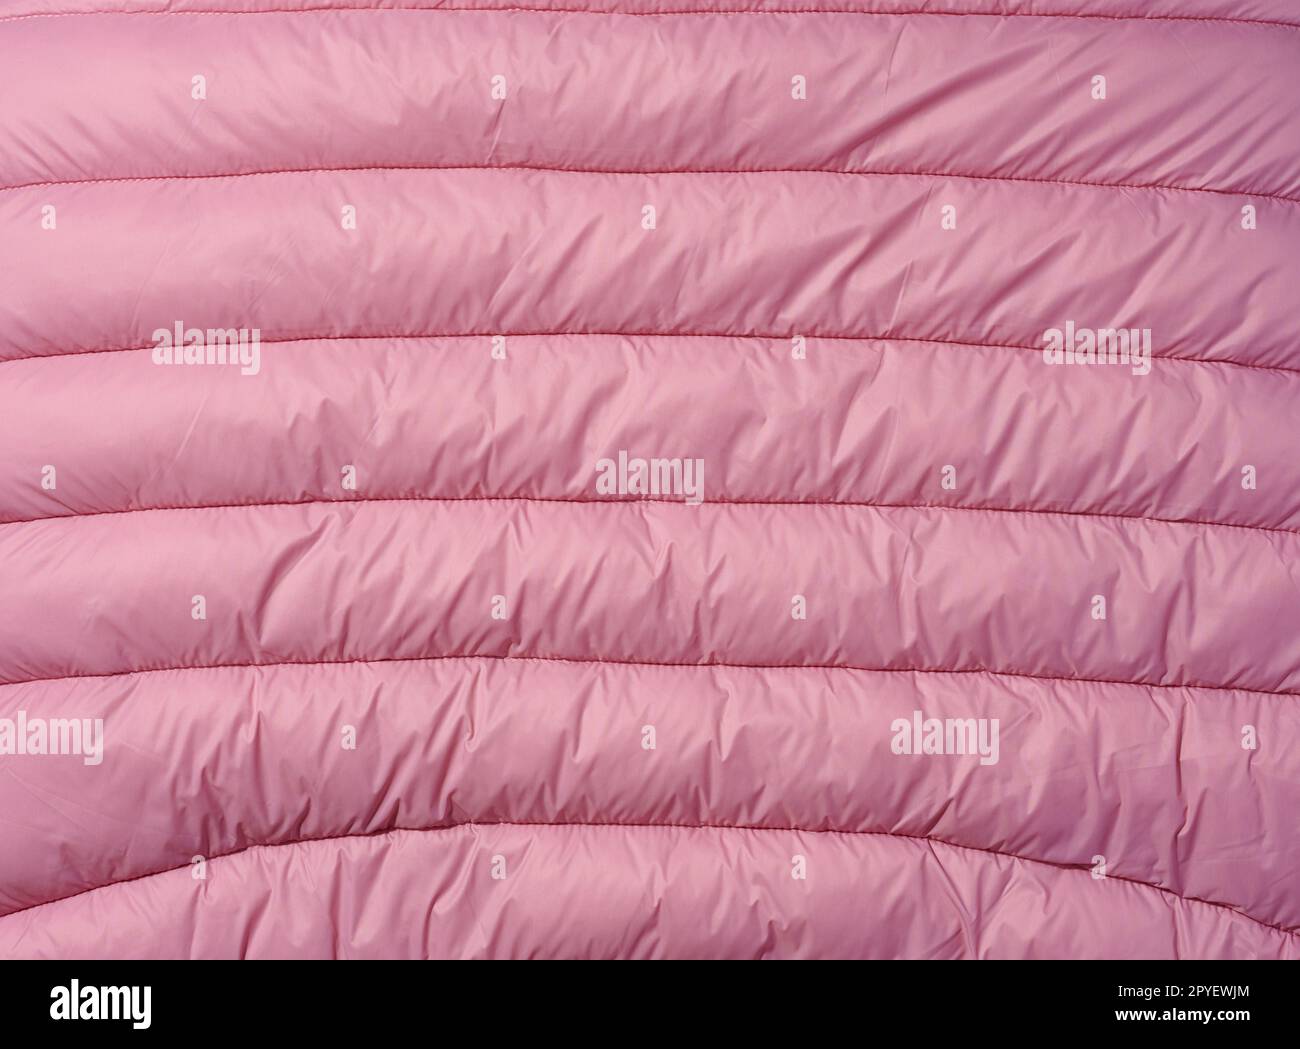 A fragment of pink fabric with down filling and stitching, fabric for jackets and coats. Stock Photo